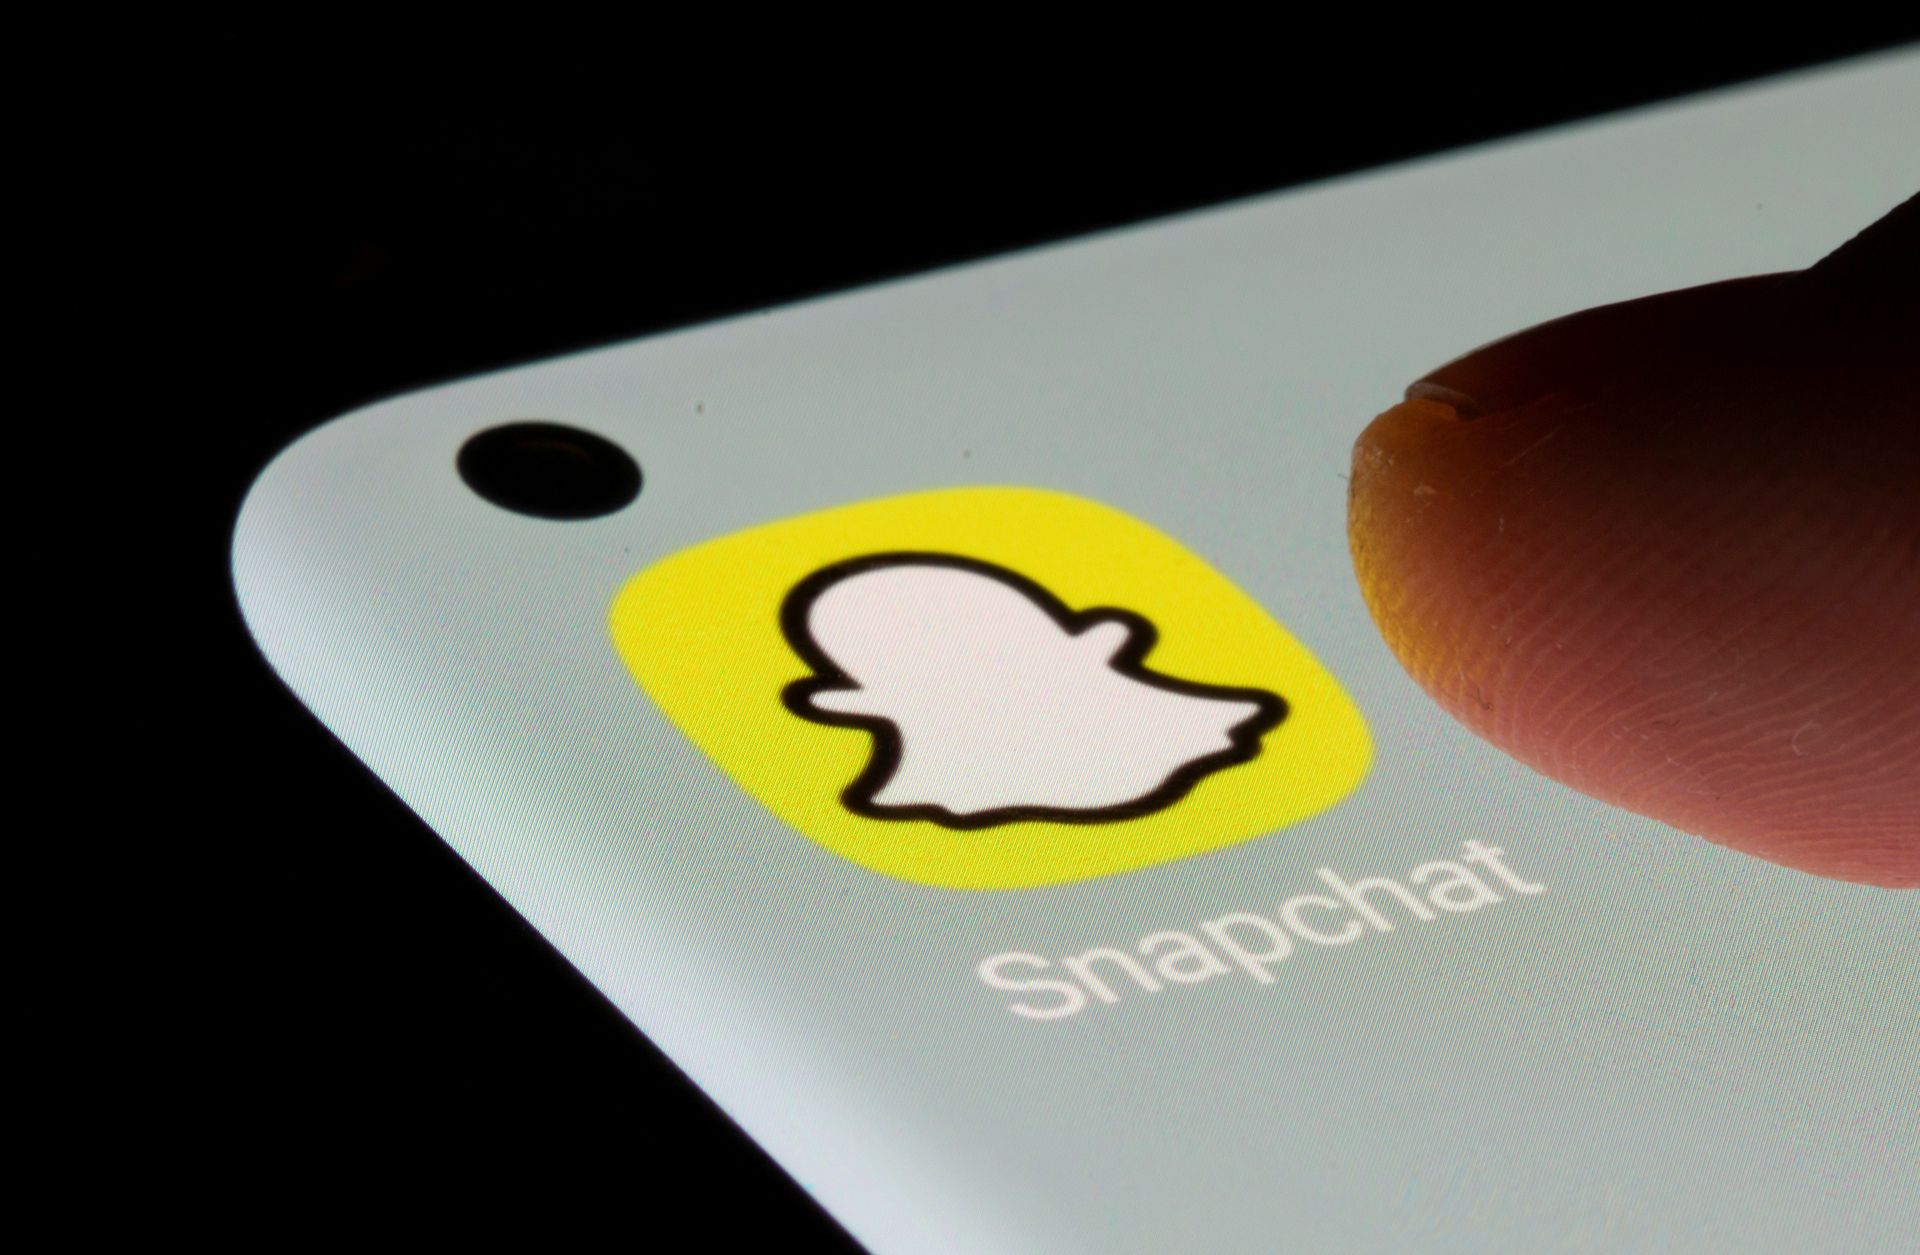 Today, we are going to be going over the Snapchat Plus subscription service, which is reported to be a premium subscription for the popular social media app.